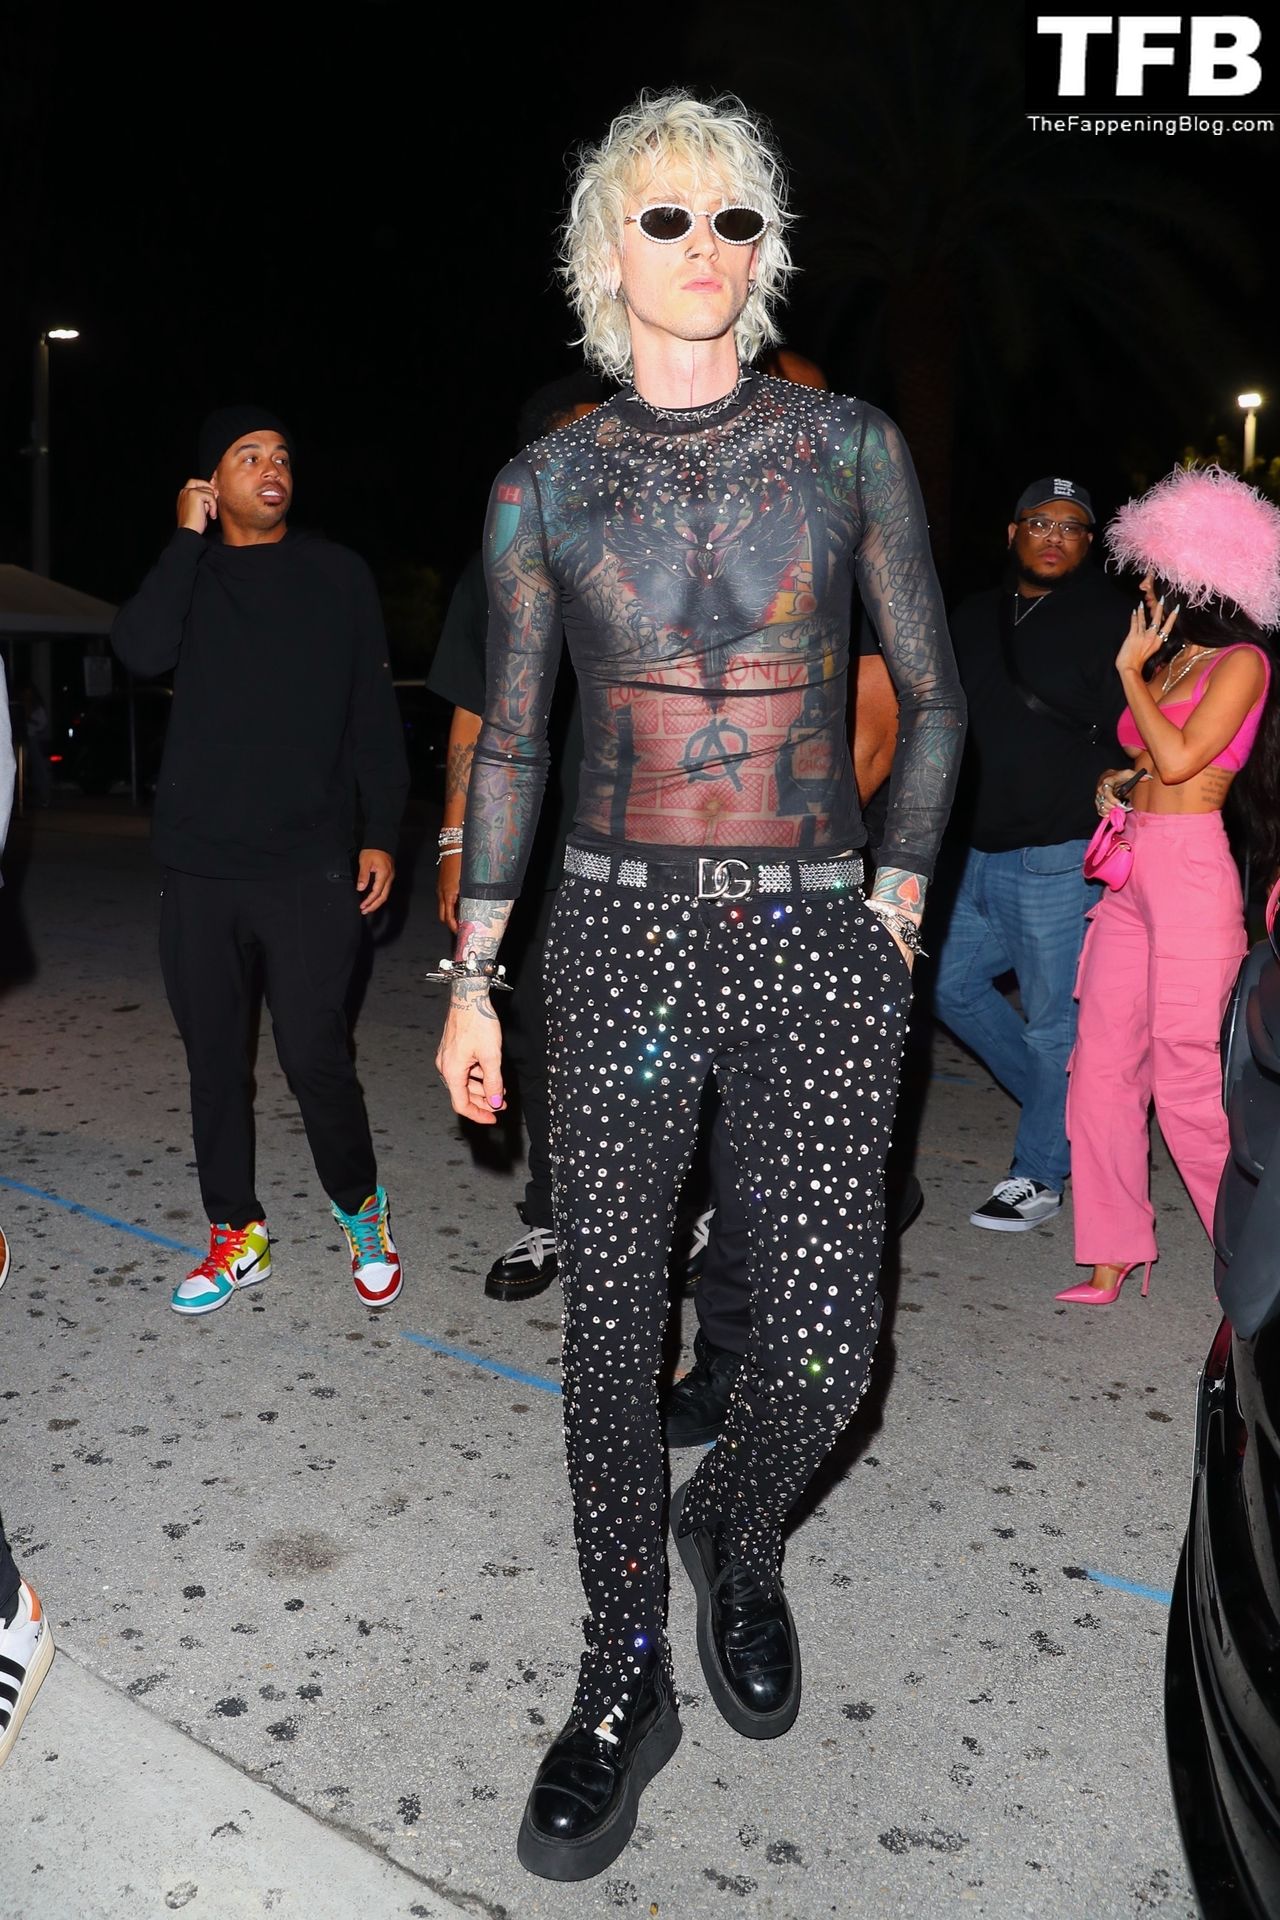 MGK Arrives For His Art Basel Performance at E11even Nightclub with Megan Fox (31 Photos)